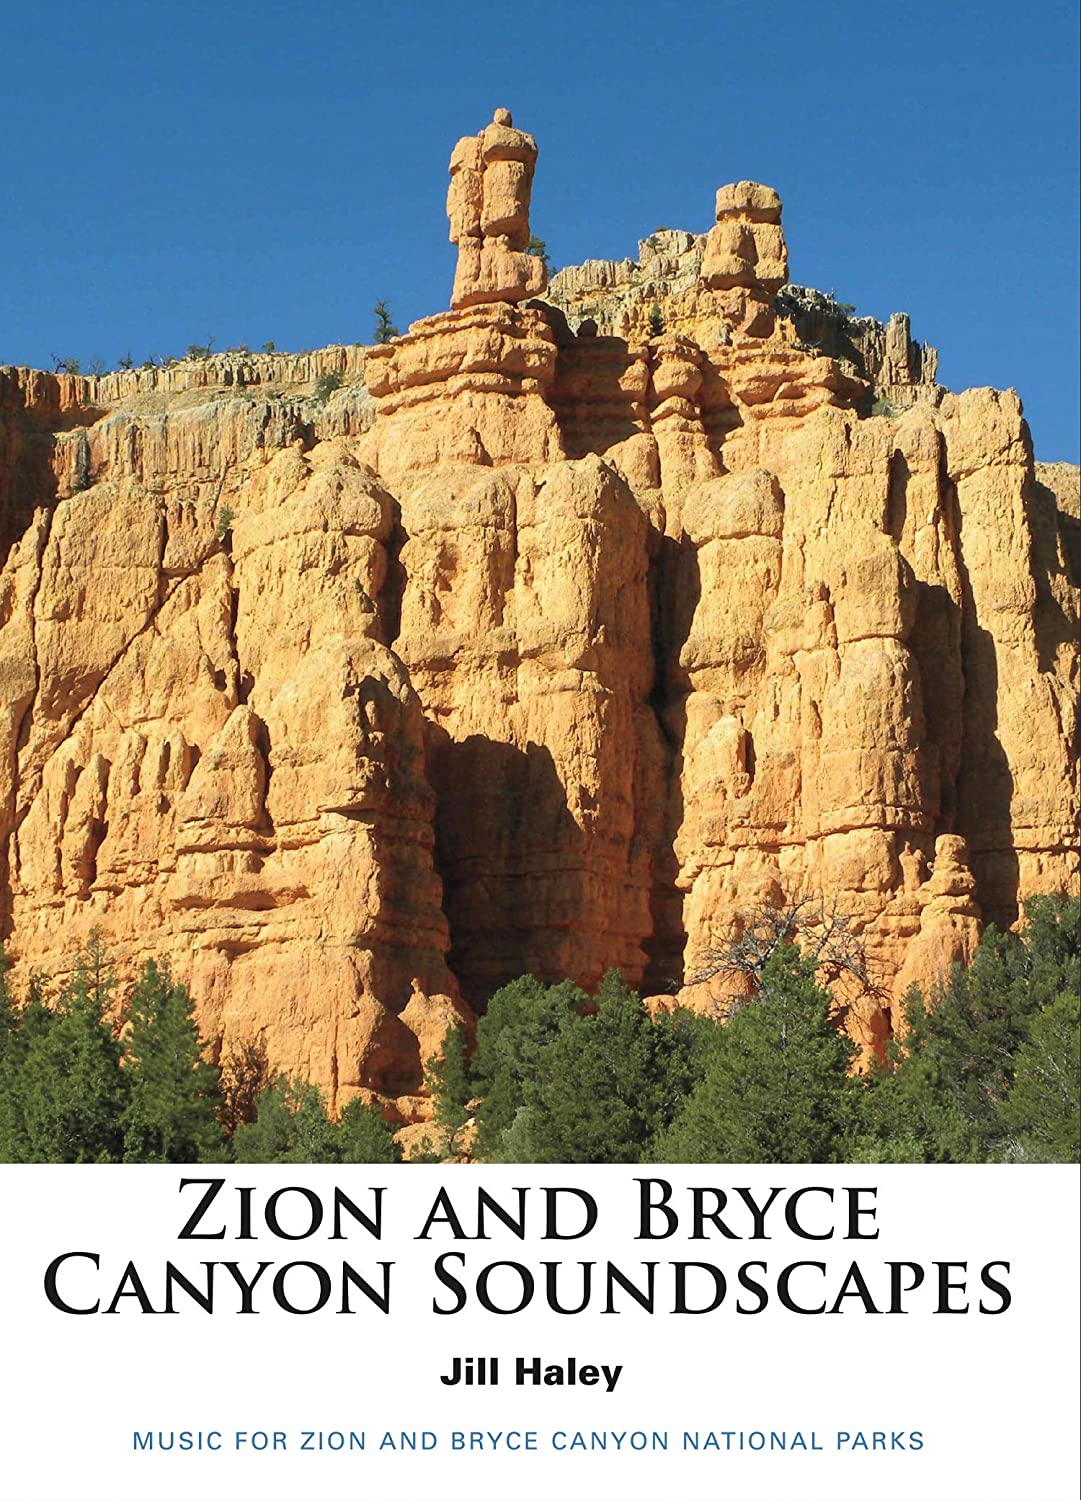 Jill Haley — Zion and Bryce Canyon Soundscapes